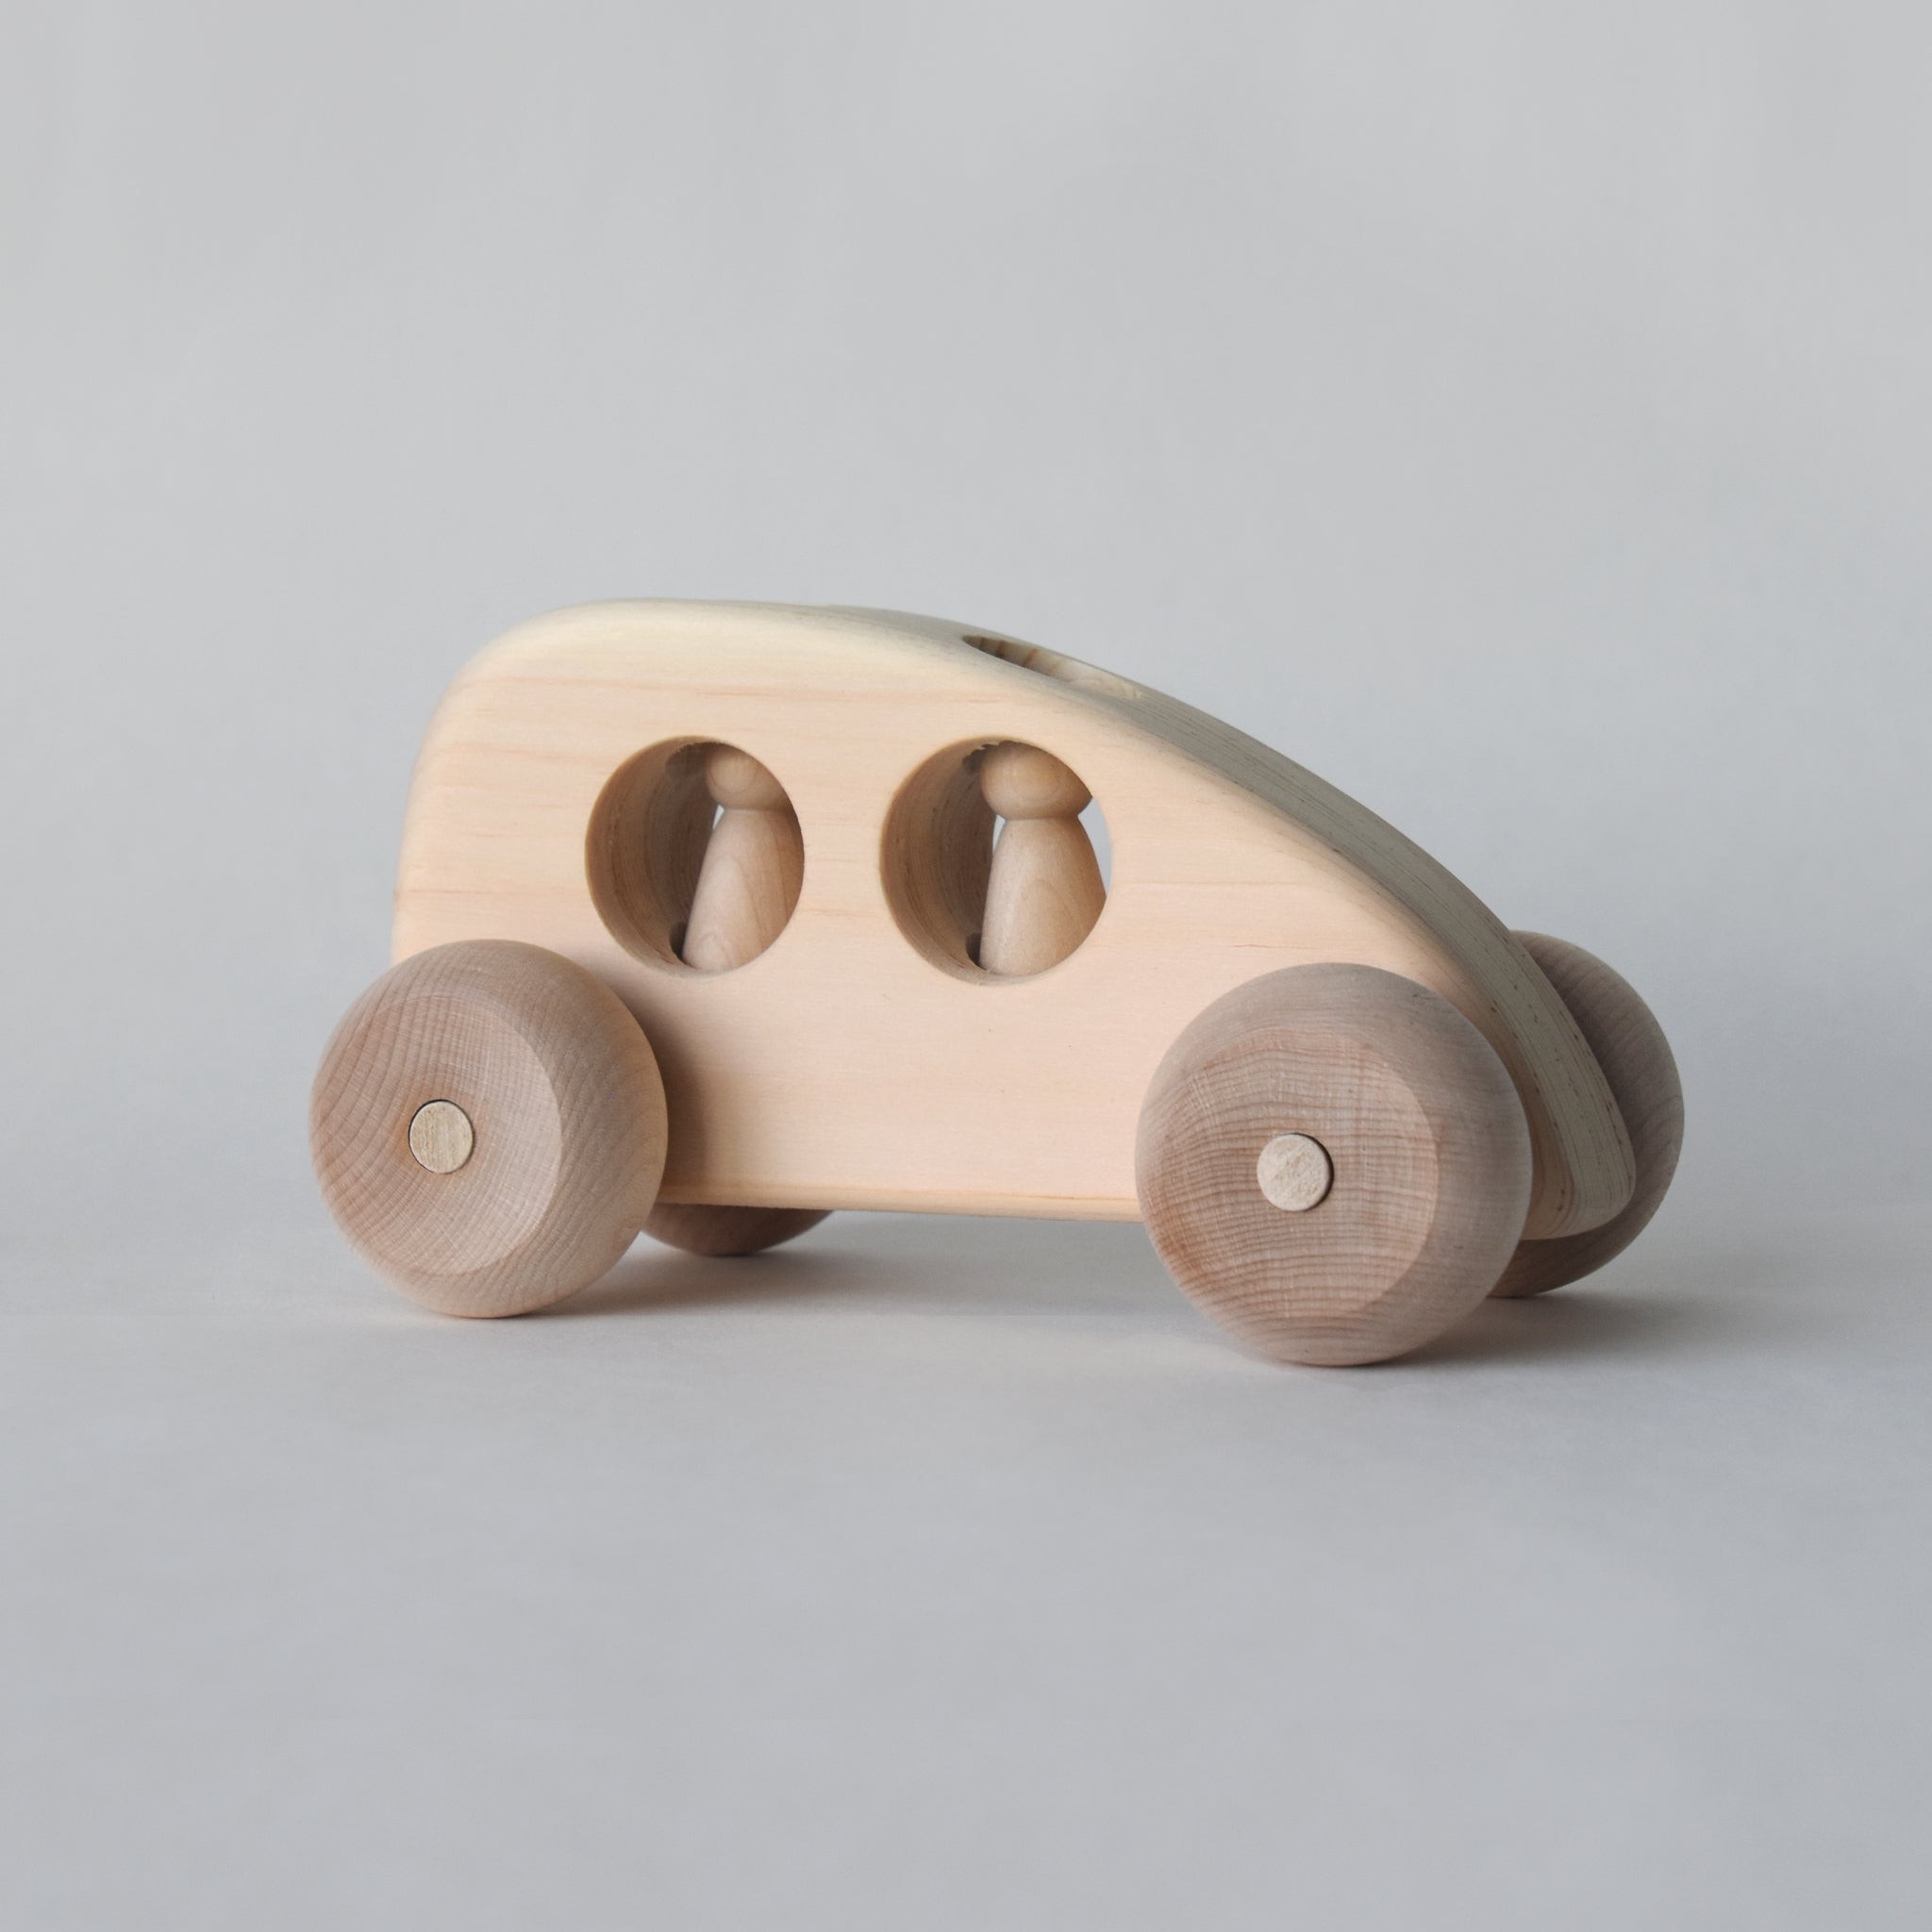 One of our favorite toy wooden cars and trucks, this little toy car is handmade in Maine | Salt Air Supply